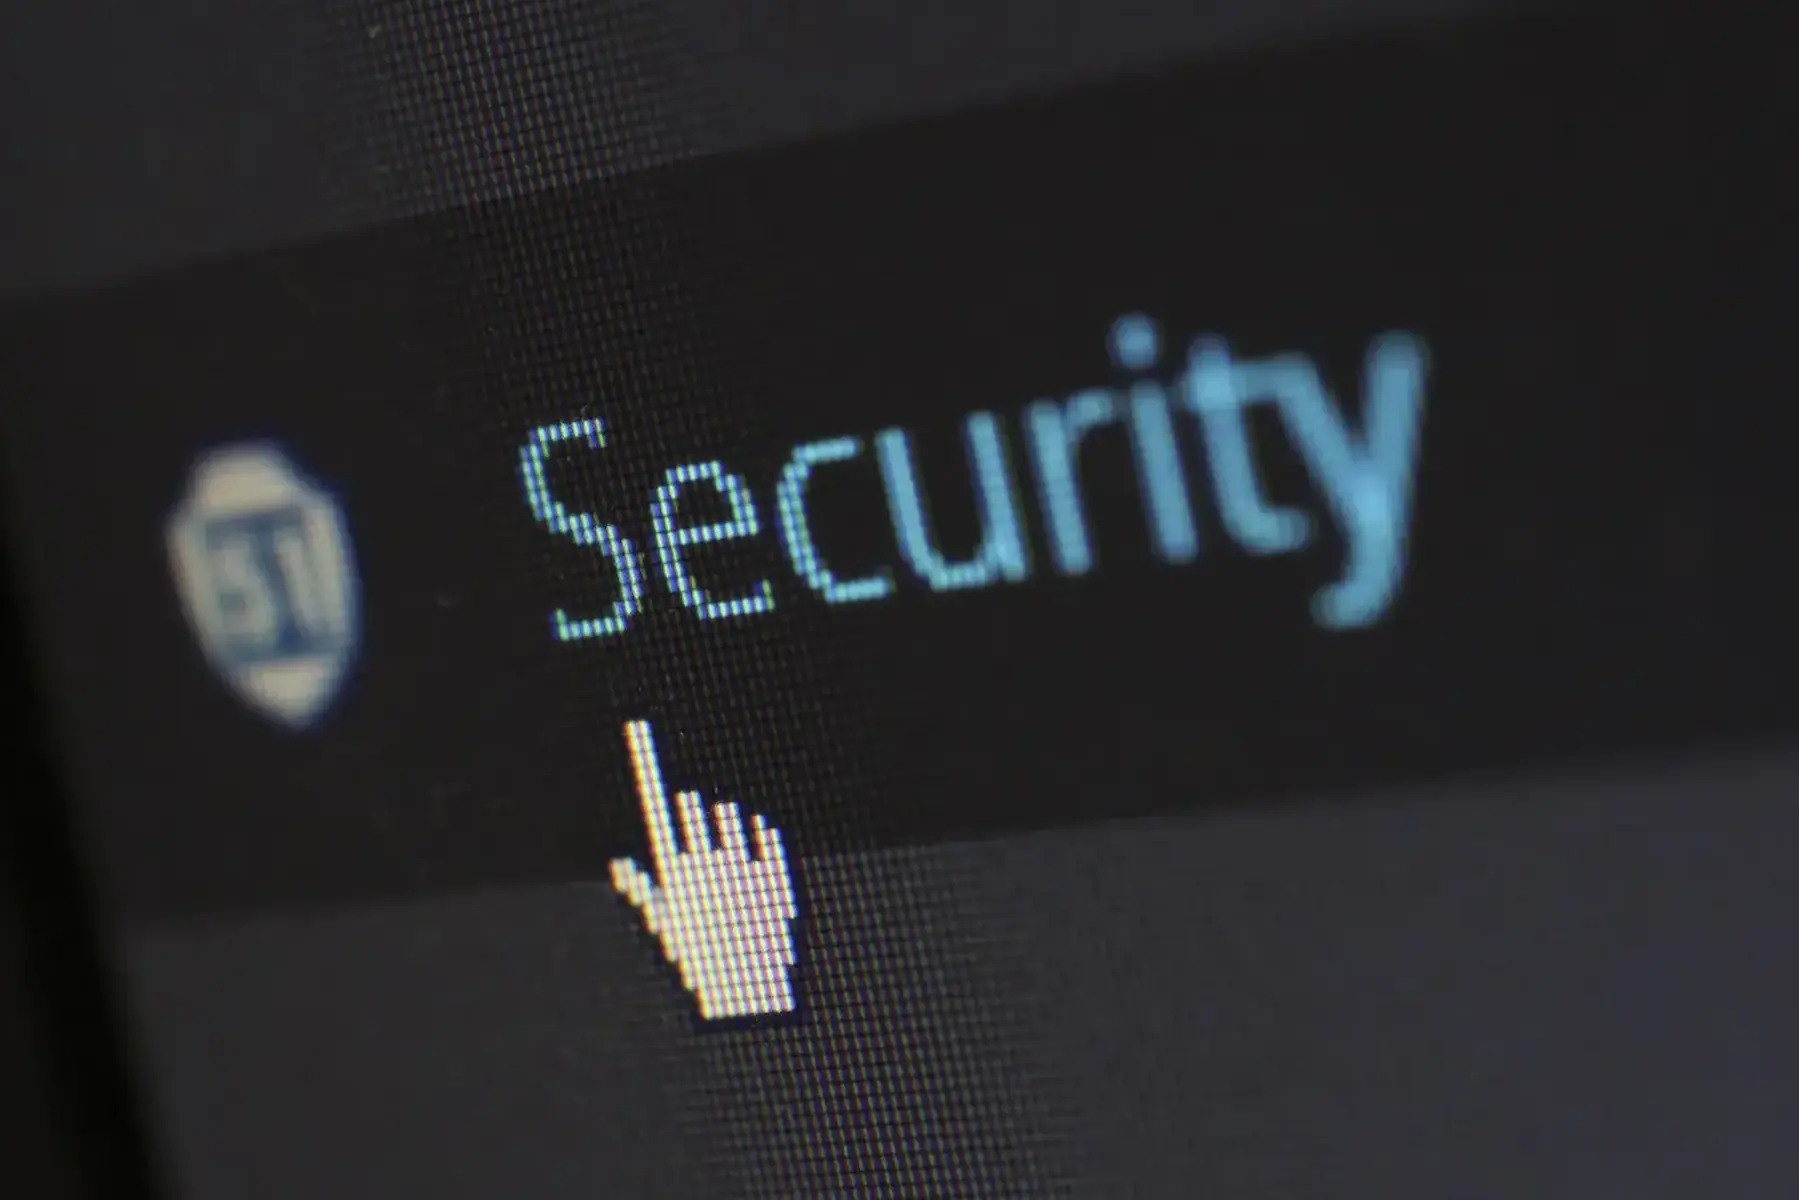 What Type Of Policy Should We Have For Internet Security?